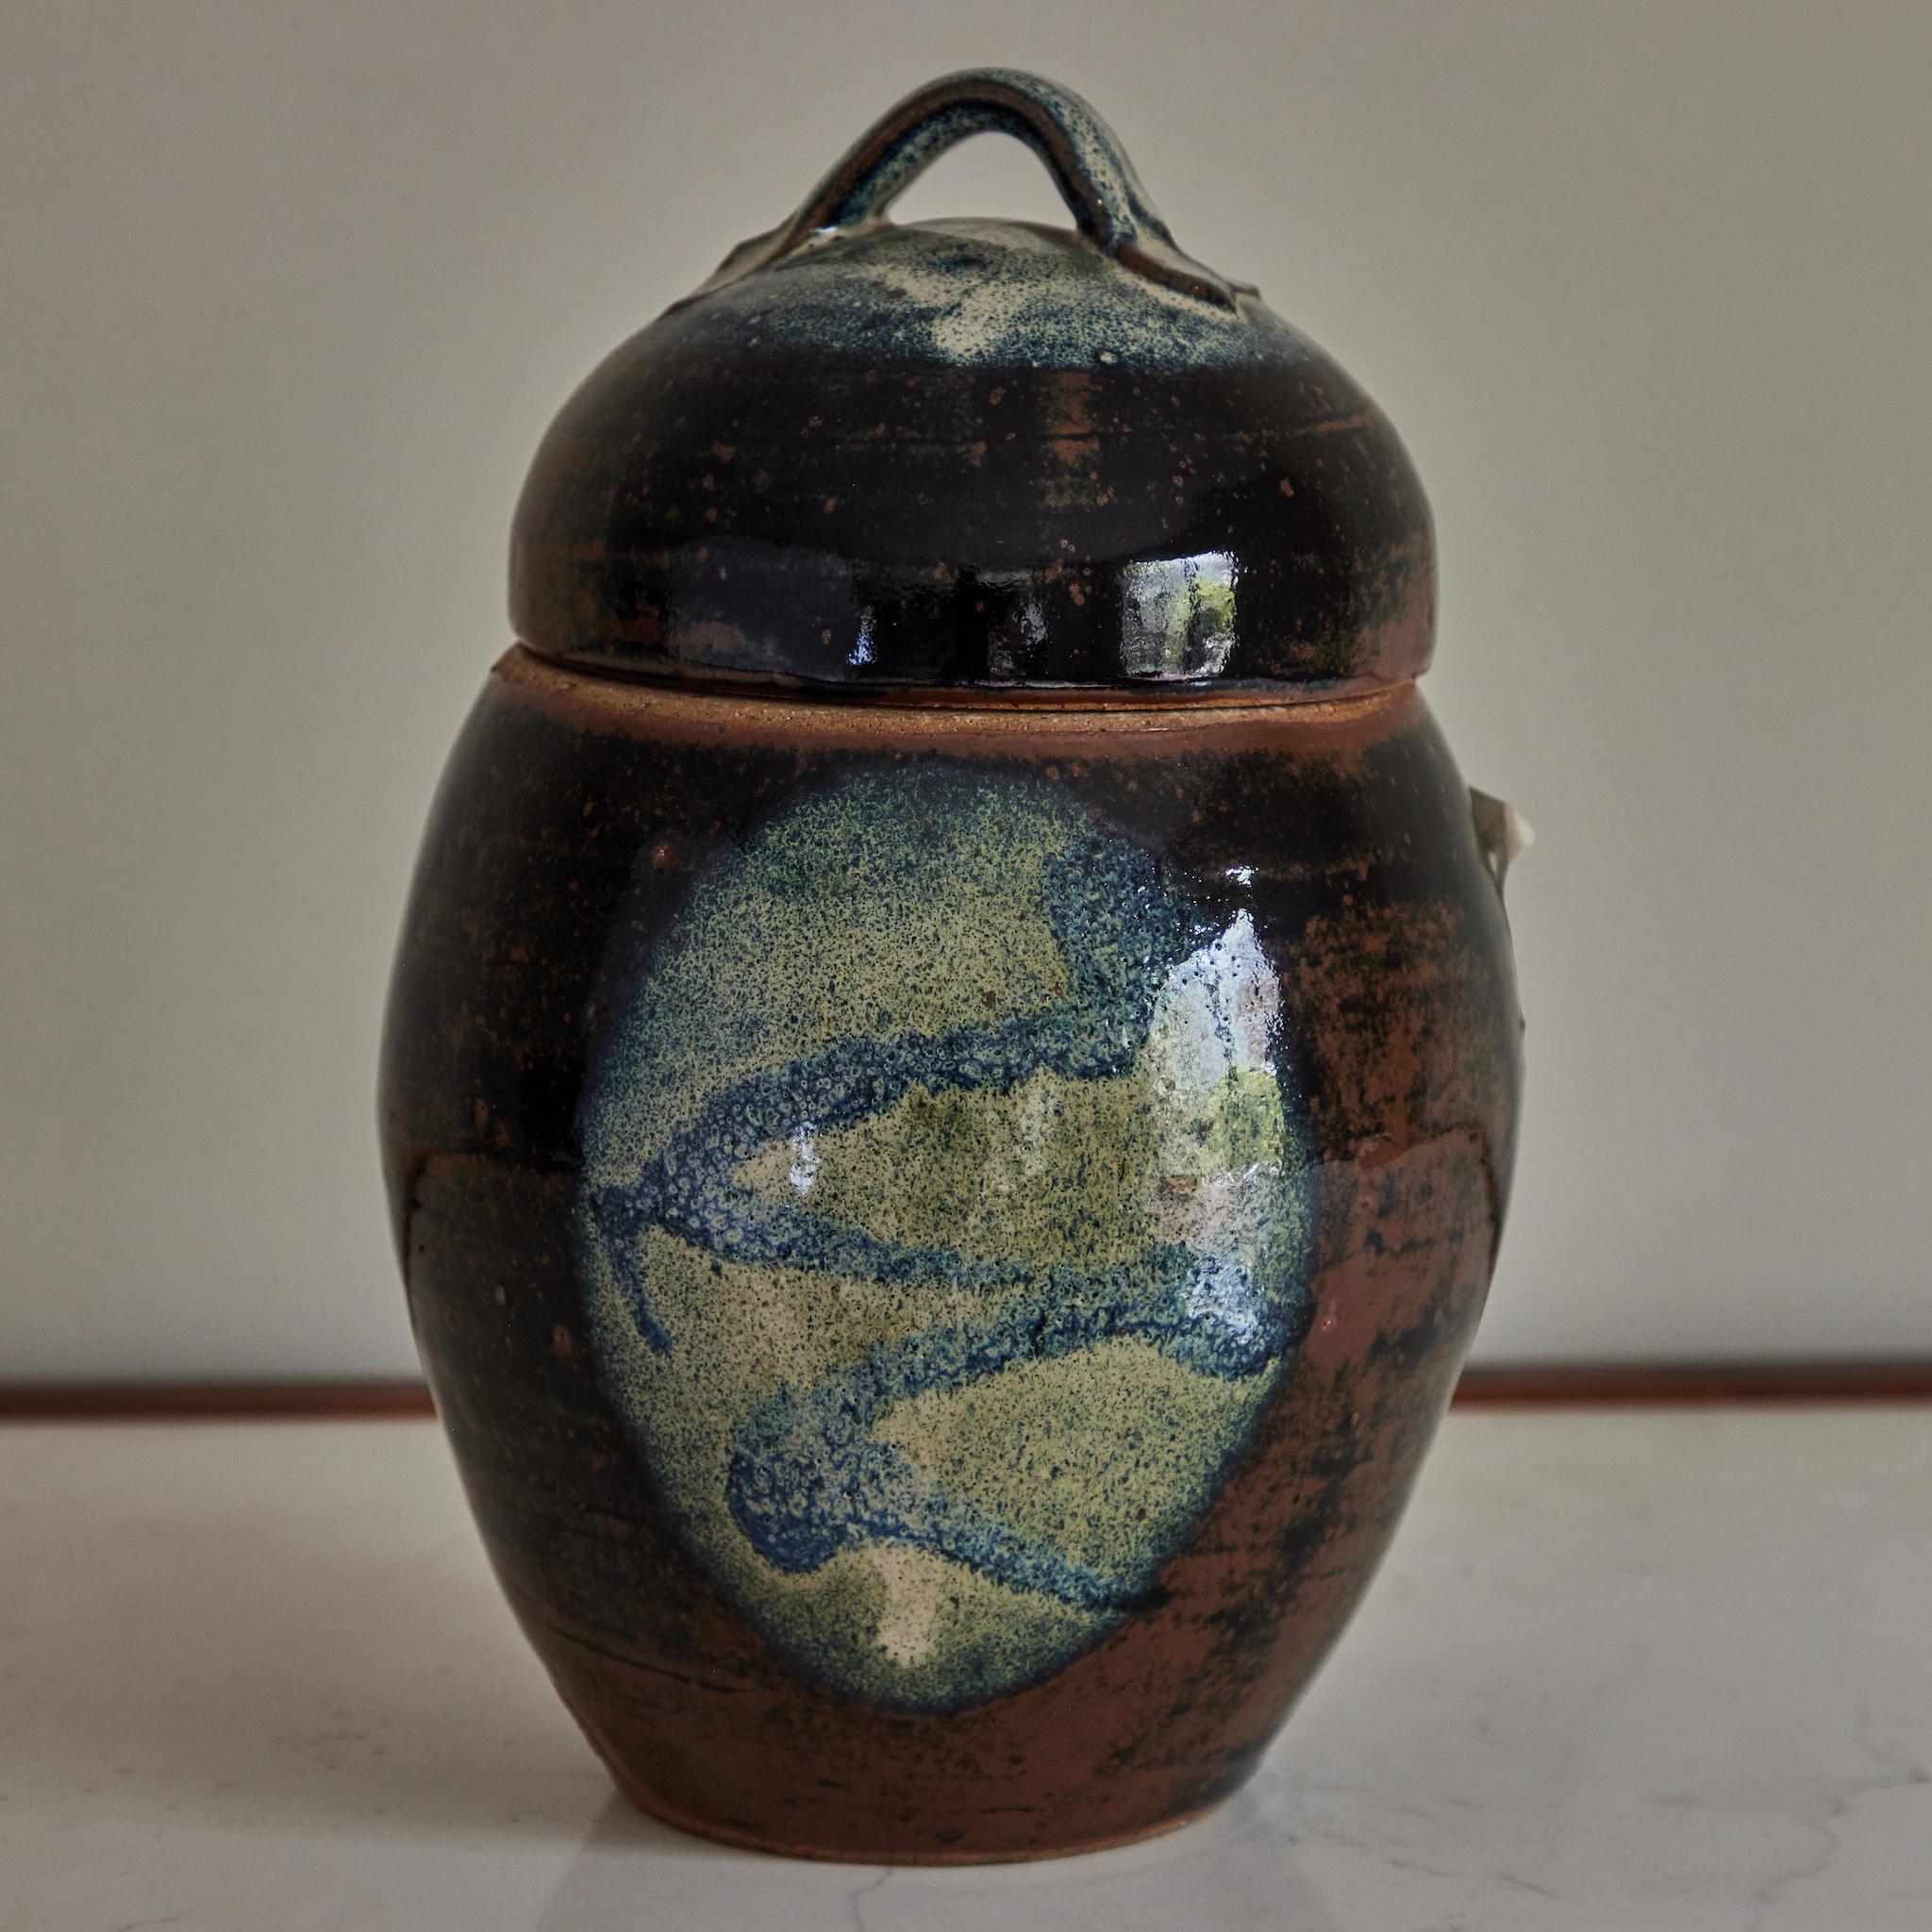 English mid-century studio pottery jar with handle-topped lid. A fabulous mix of pale mossy greens and aquatic blues, with washes of rich loamy browns and volcanic black, the jar has an earthy, elemental quality. 

England, circa 1960

Dimensions: